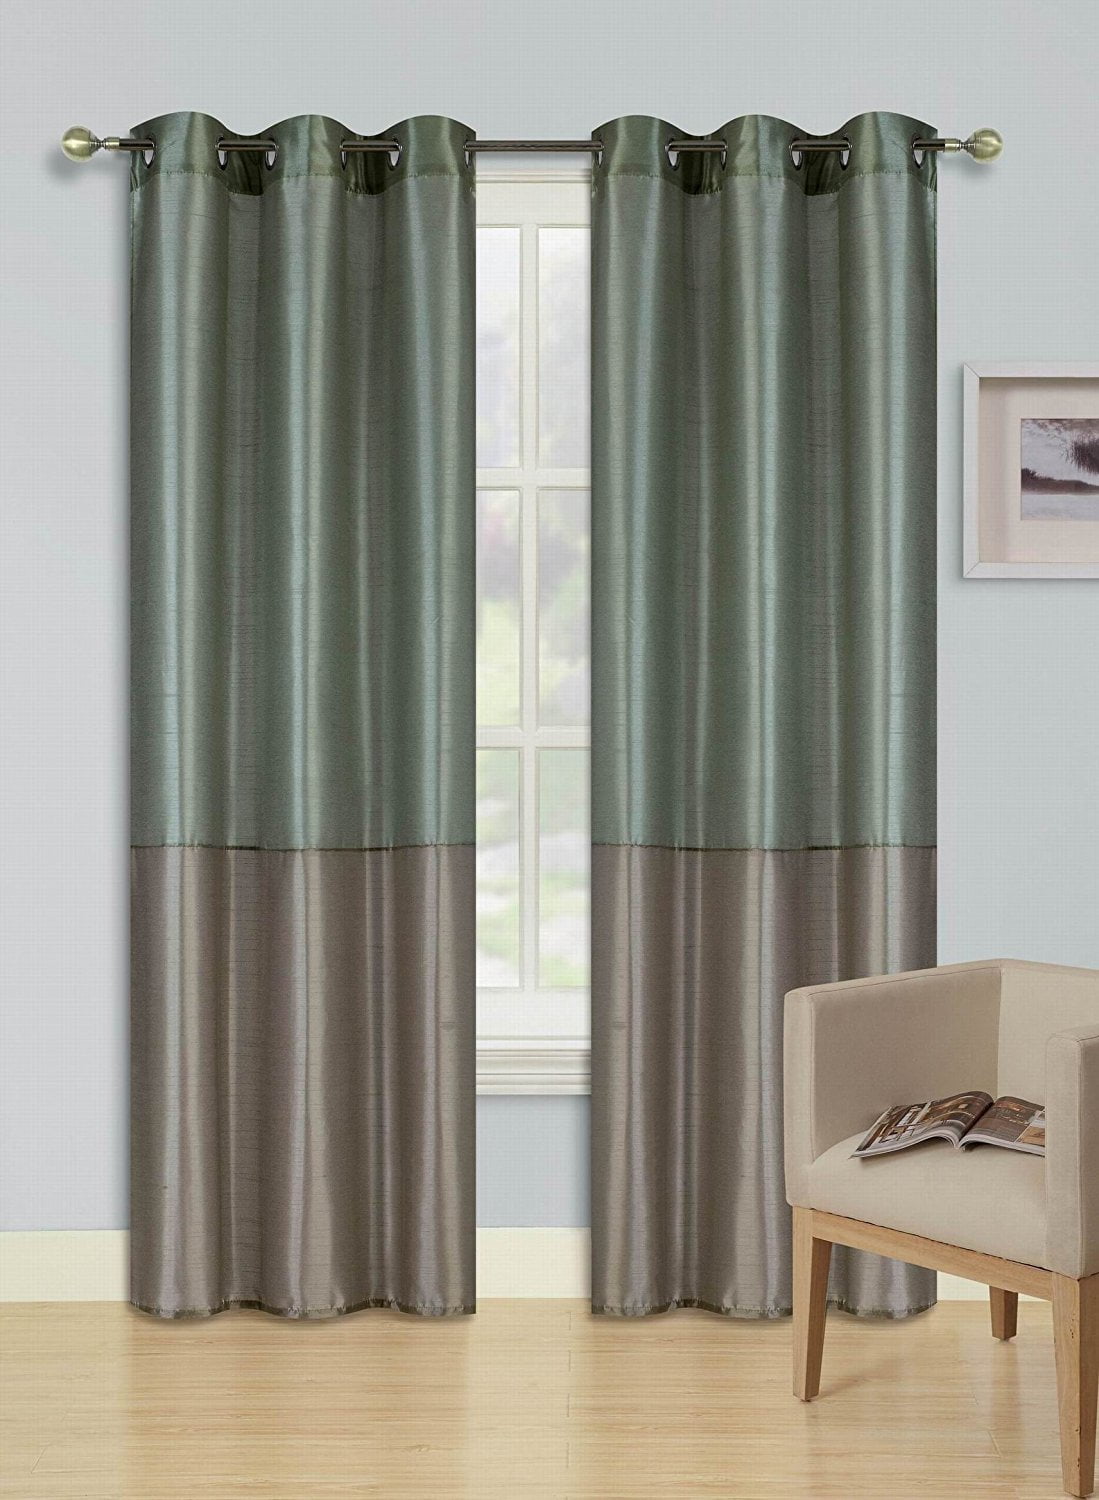 1PC New 2-TONE Window Curtain Grommet Panel Lined Blackout EID SAGE GREEN TAUPE 